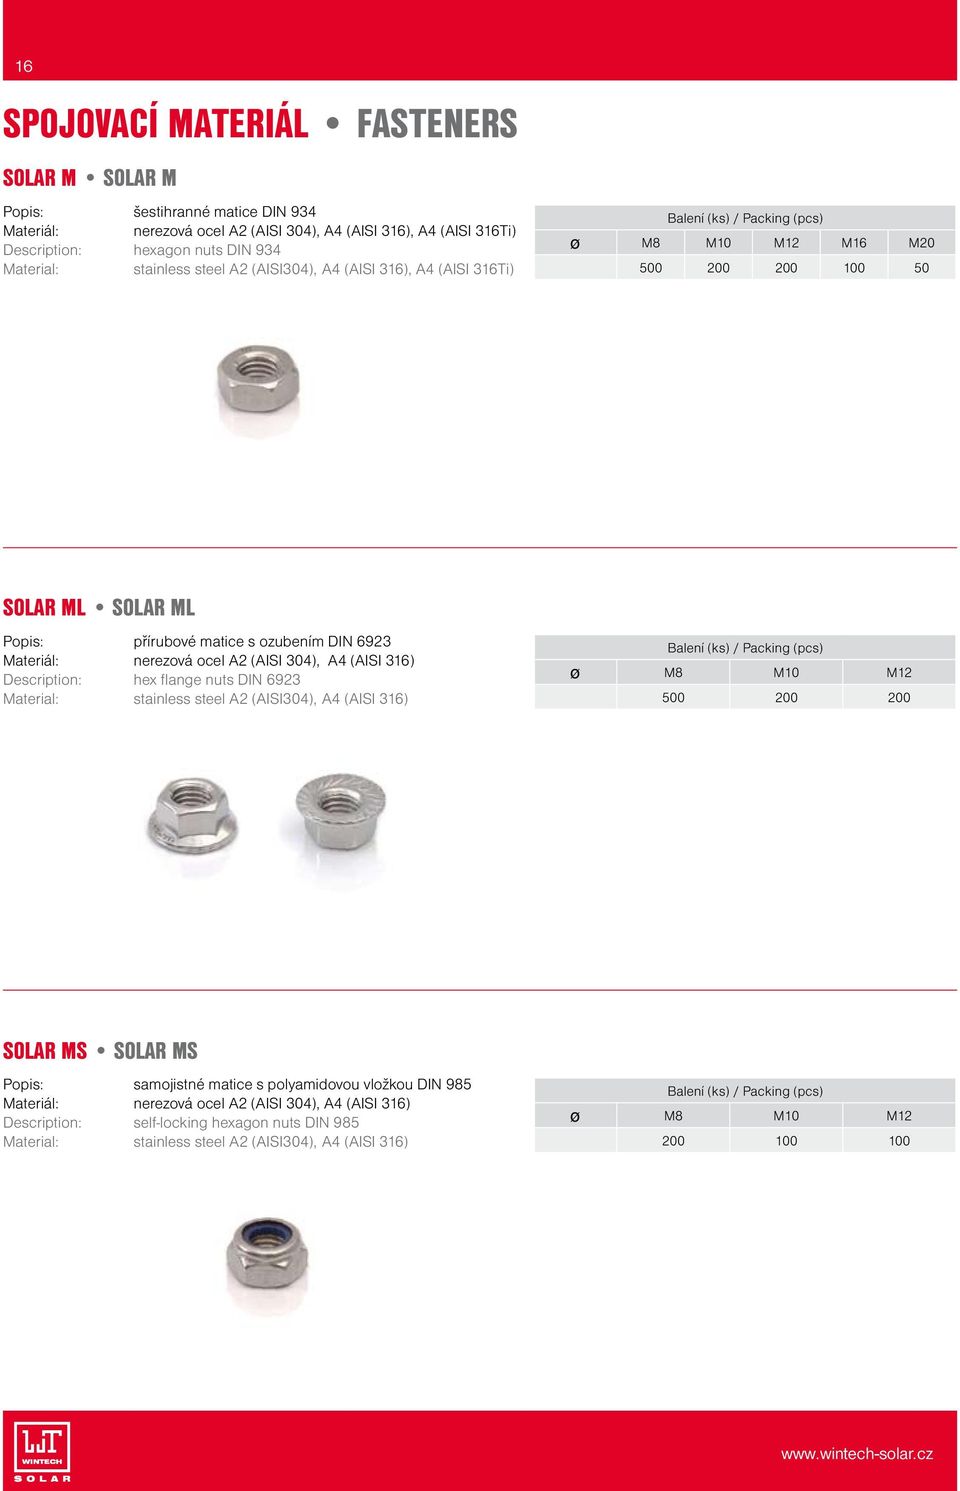 A2 (AISI 304), A4 (AISI 316) hex flange nuts DIN 6923 Material: stainless steel A2 (AISI304), A4 (AISI 316) ø M8 M10 M12 500 200 200 SOLAR MS SOLAR MS samojistné matice s